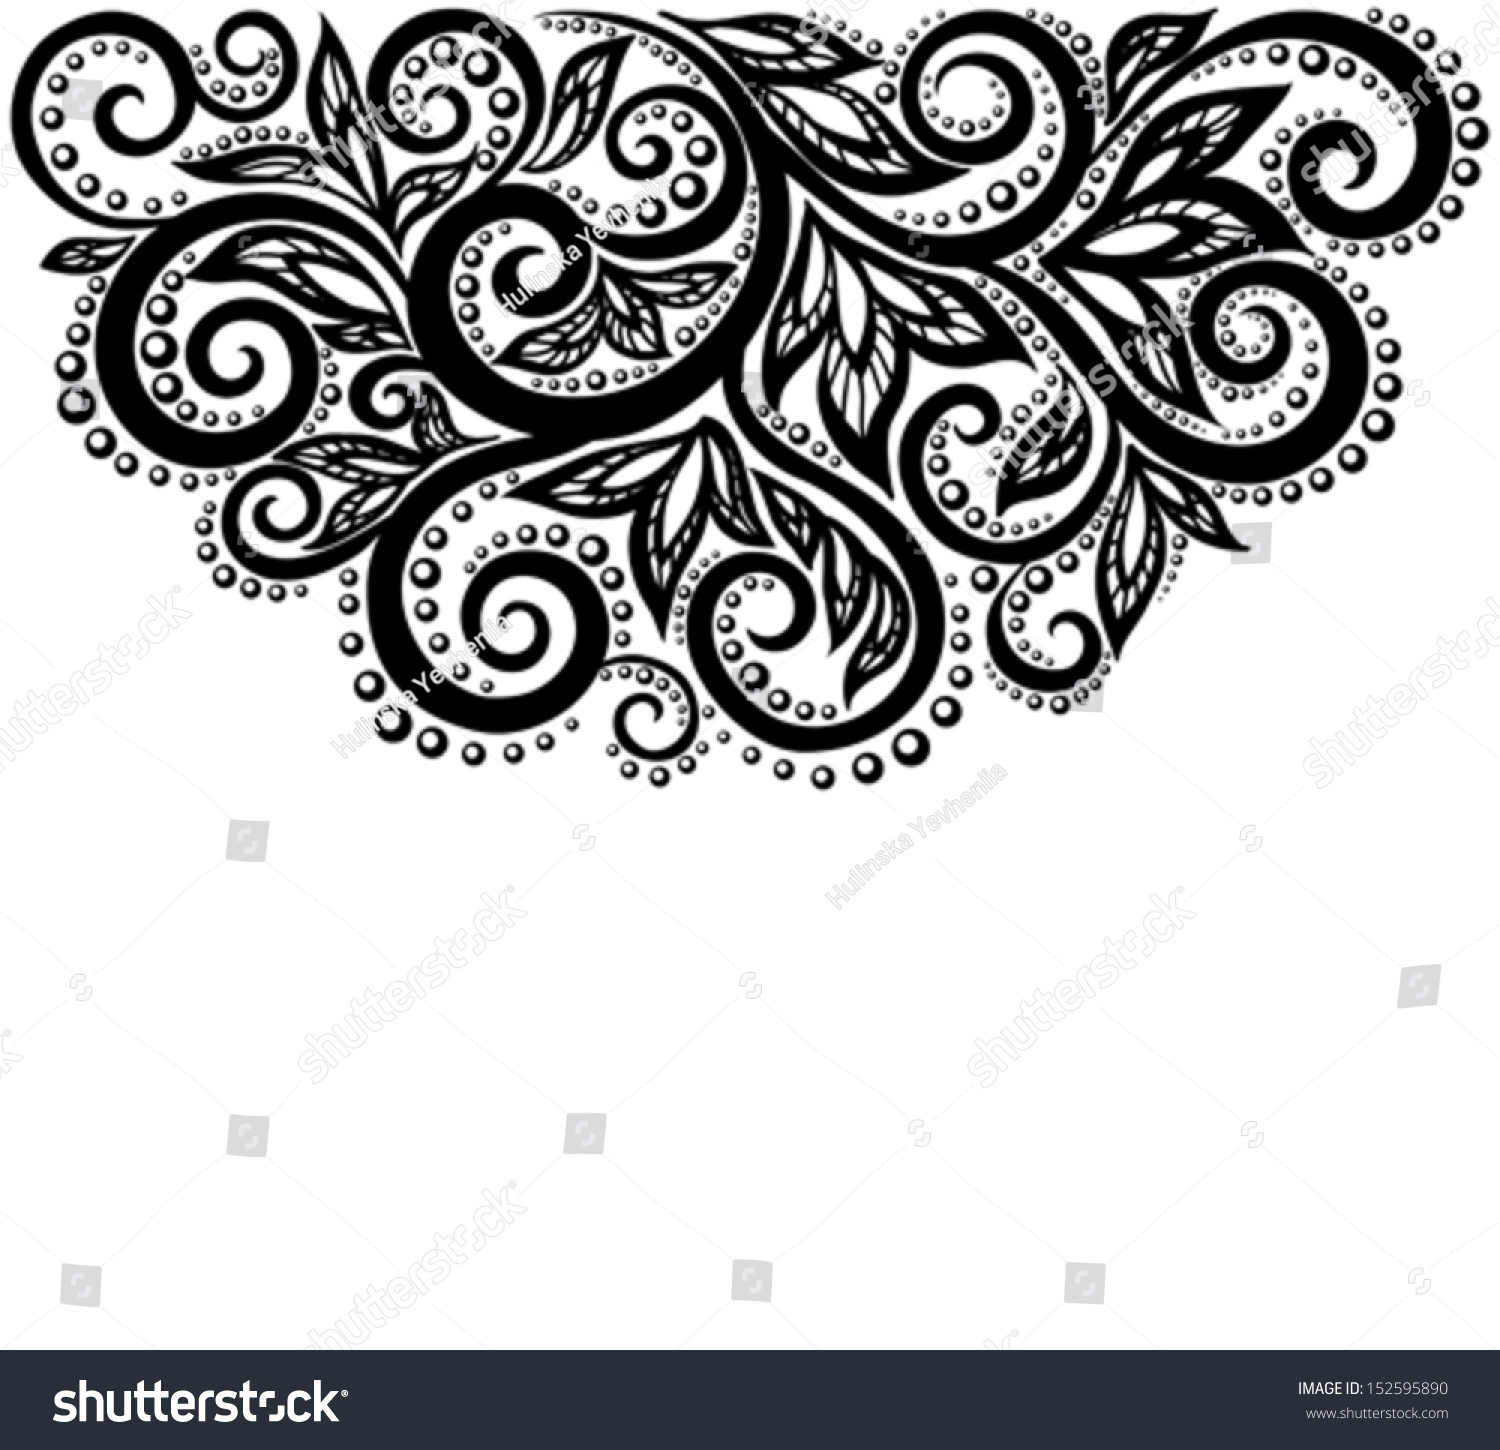 Black And White Lace Flowers And Leaves Isolated On White. Floral ...